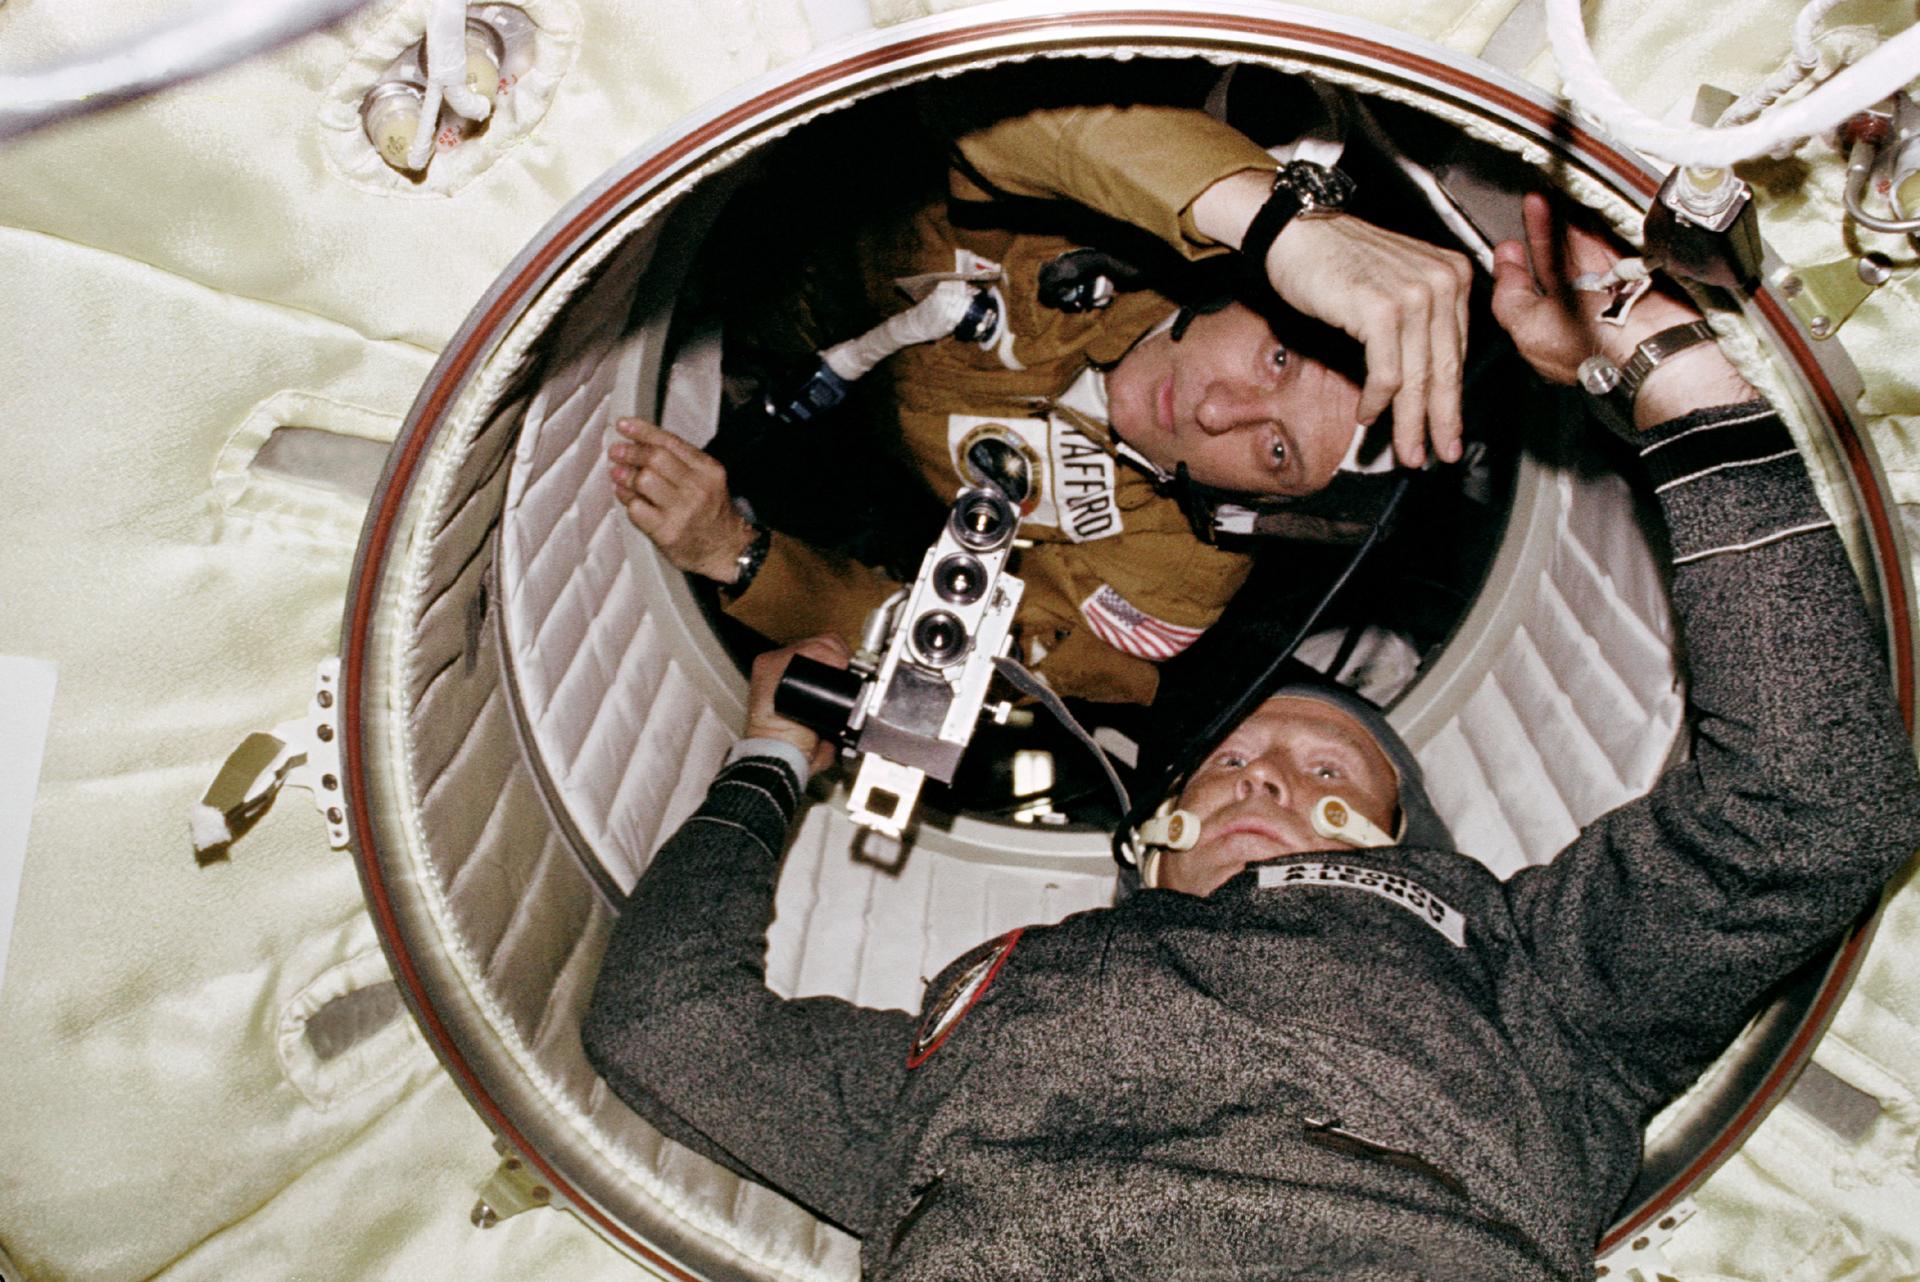 Astronaut Thomas Stafford, commander of Apollo 10, has died at age